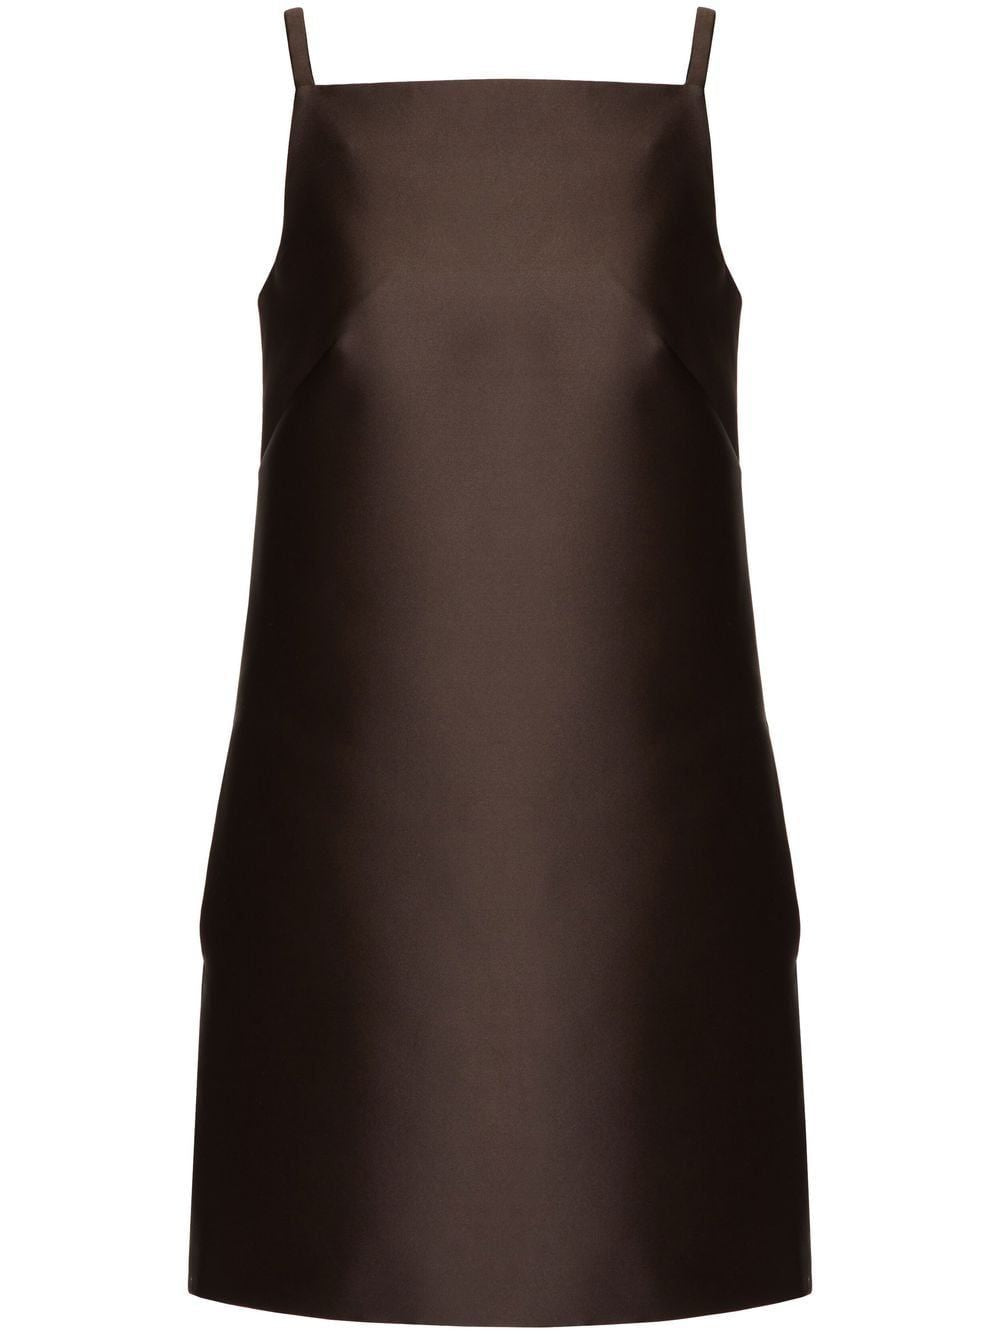 VALENTINO Cotton Dress for Women in Brown - SS23 Collection